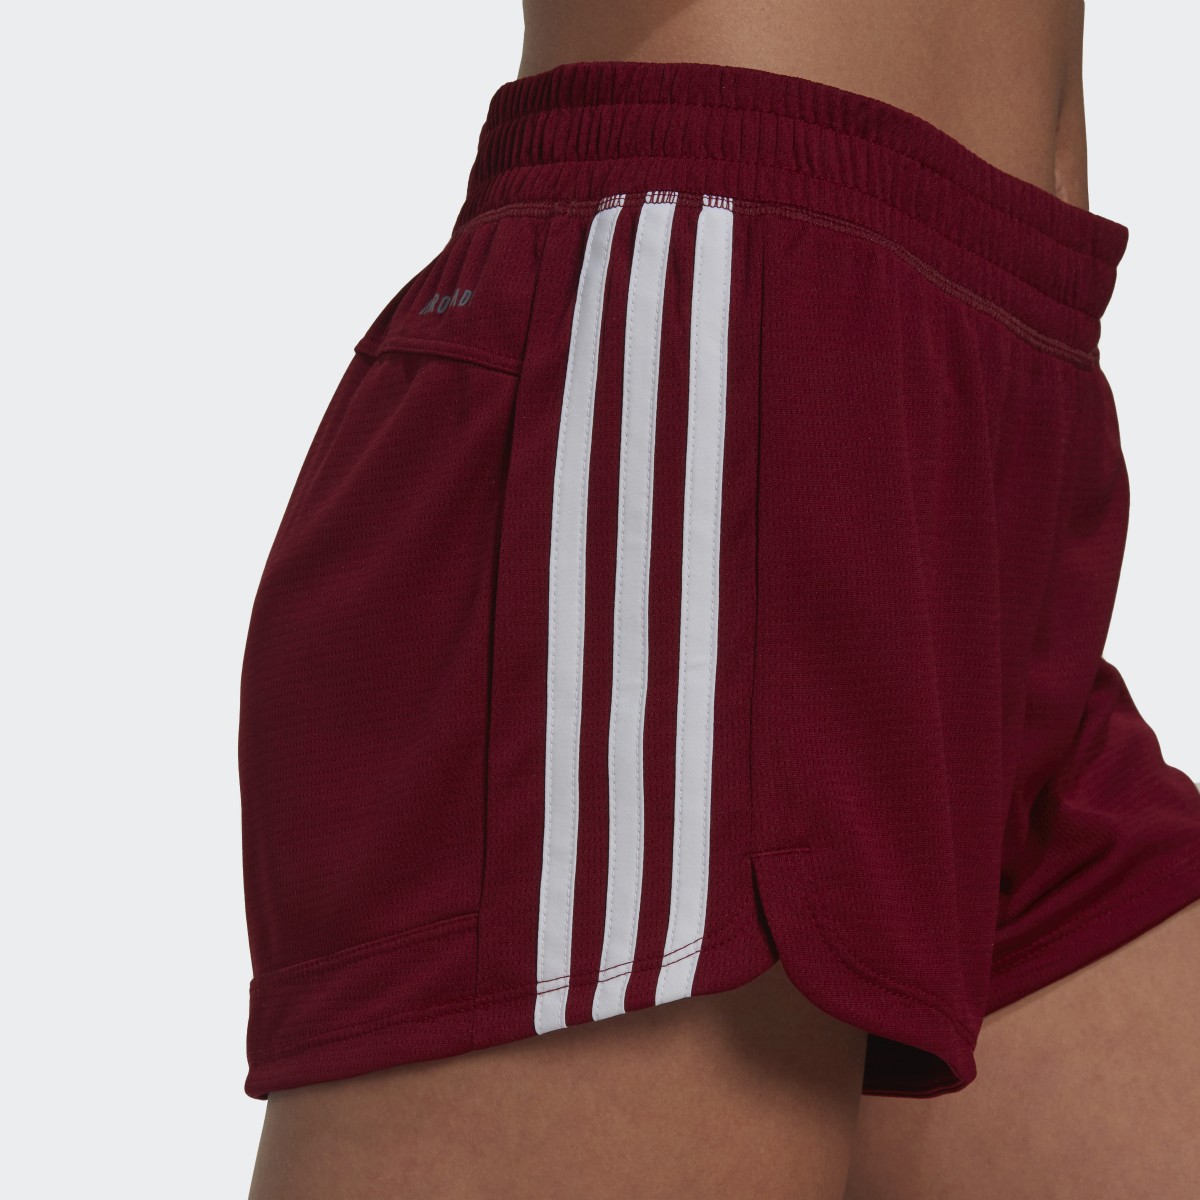 Adidas Pacer 3-Stripes Knit Shorts. 7